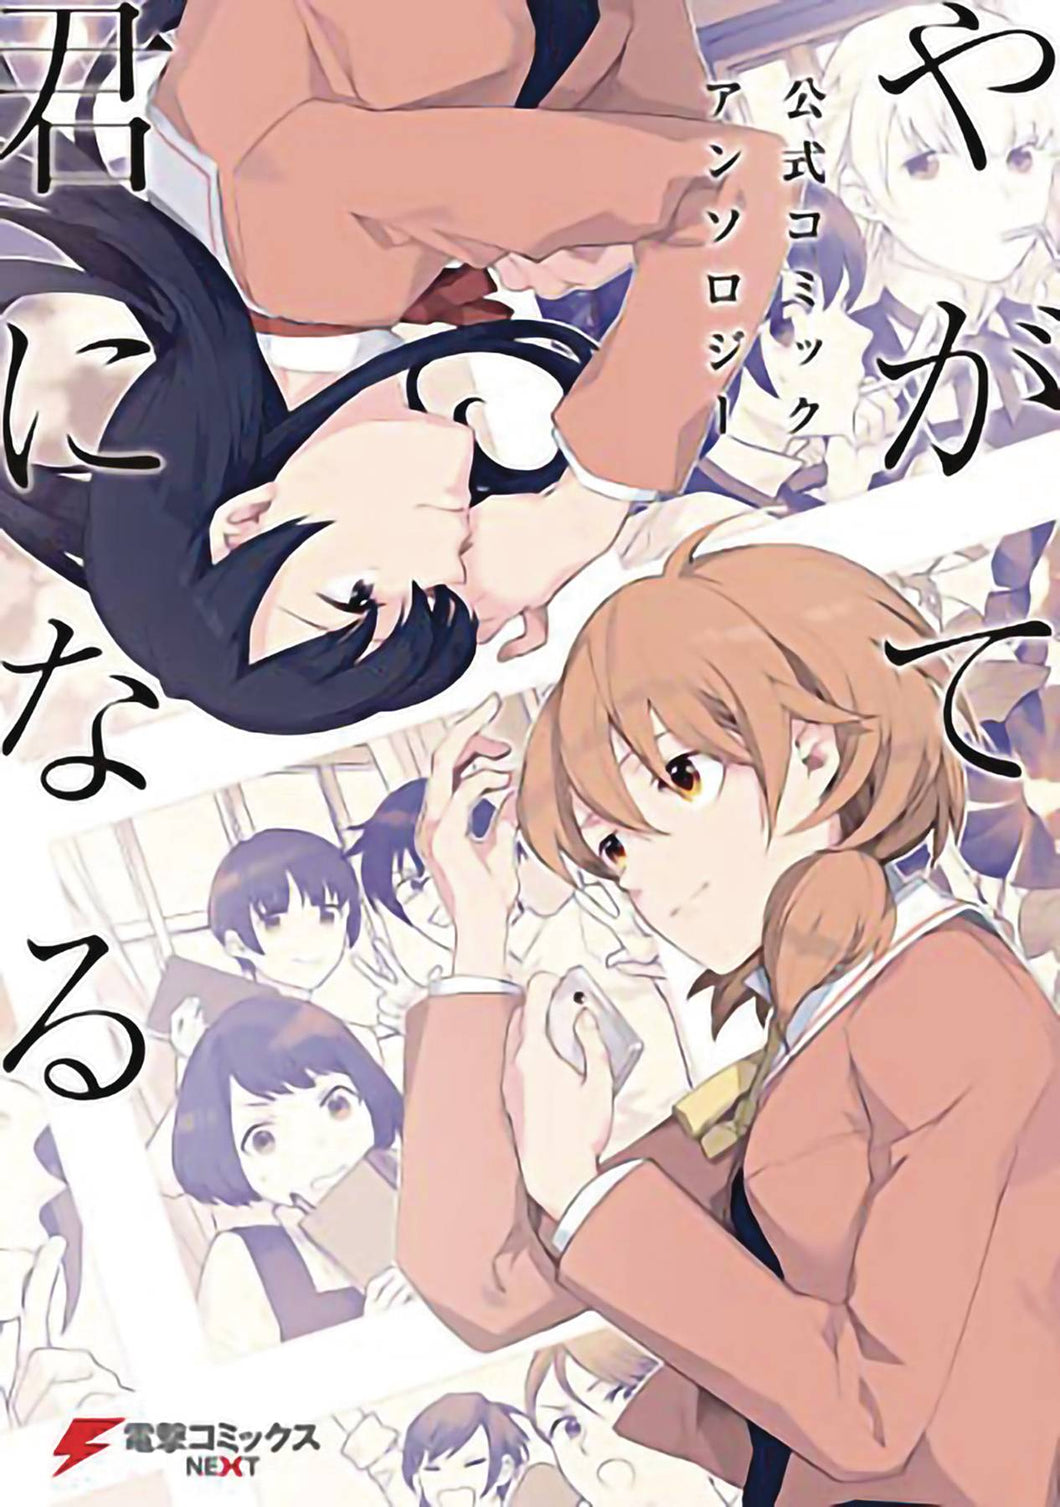 Bloom Into You Anthology GN Vol 01 - Books